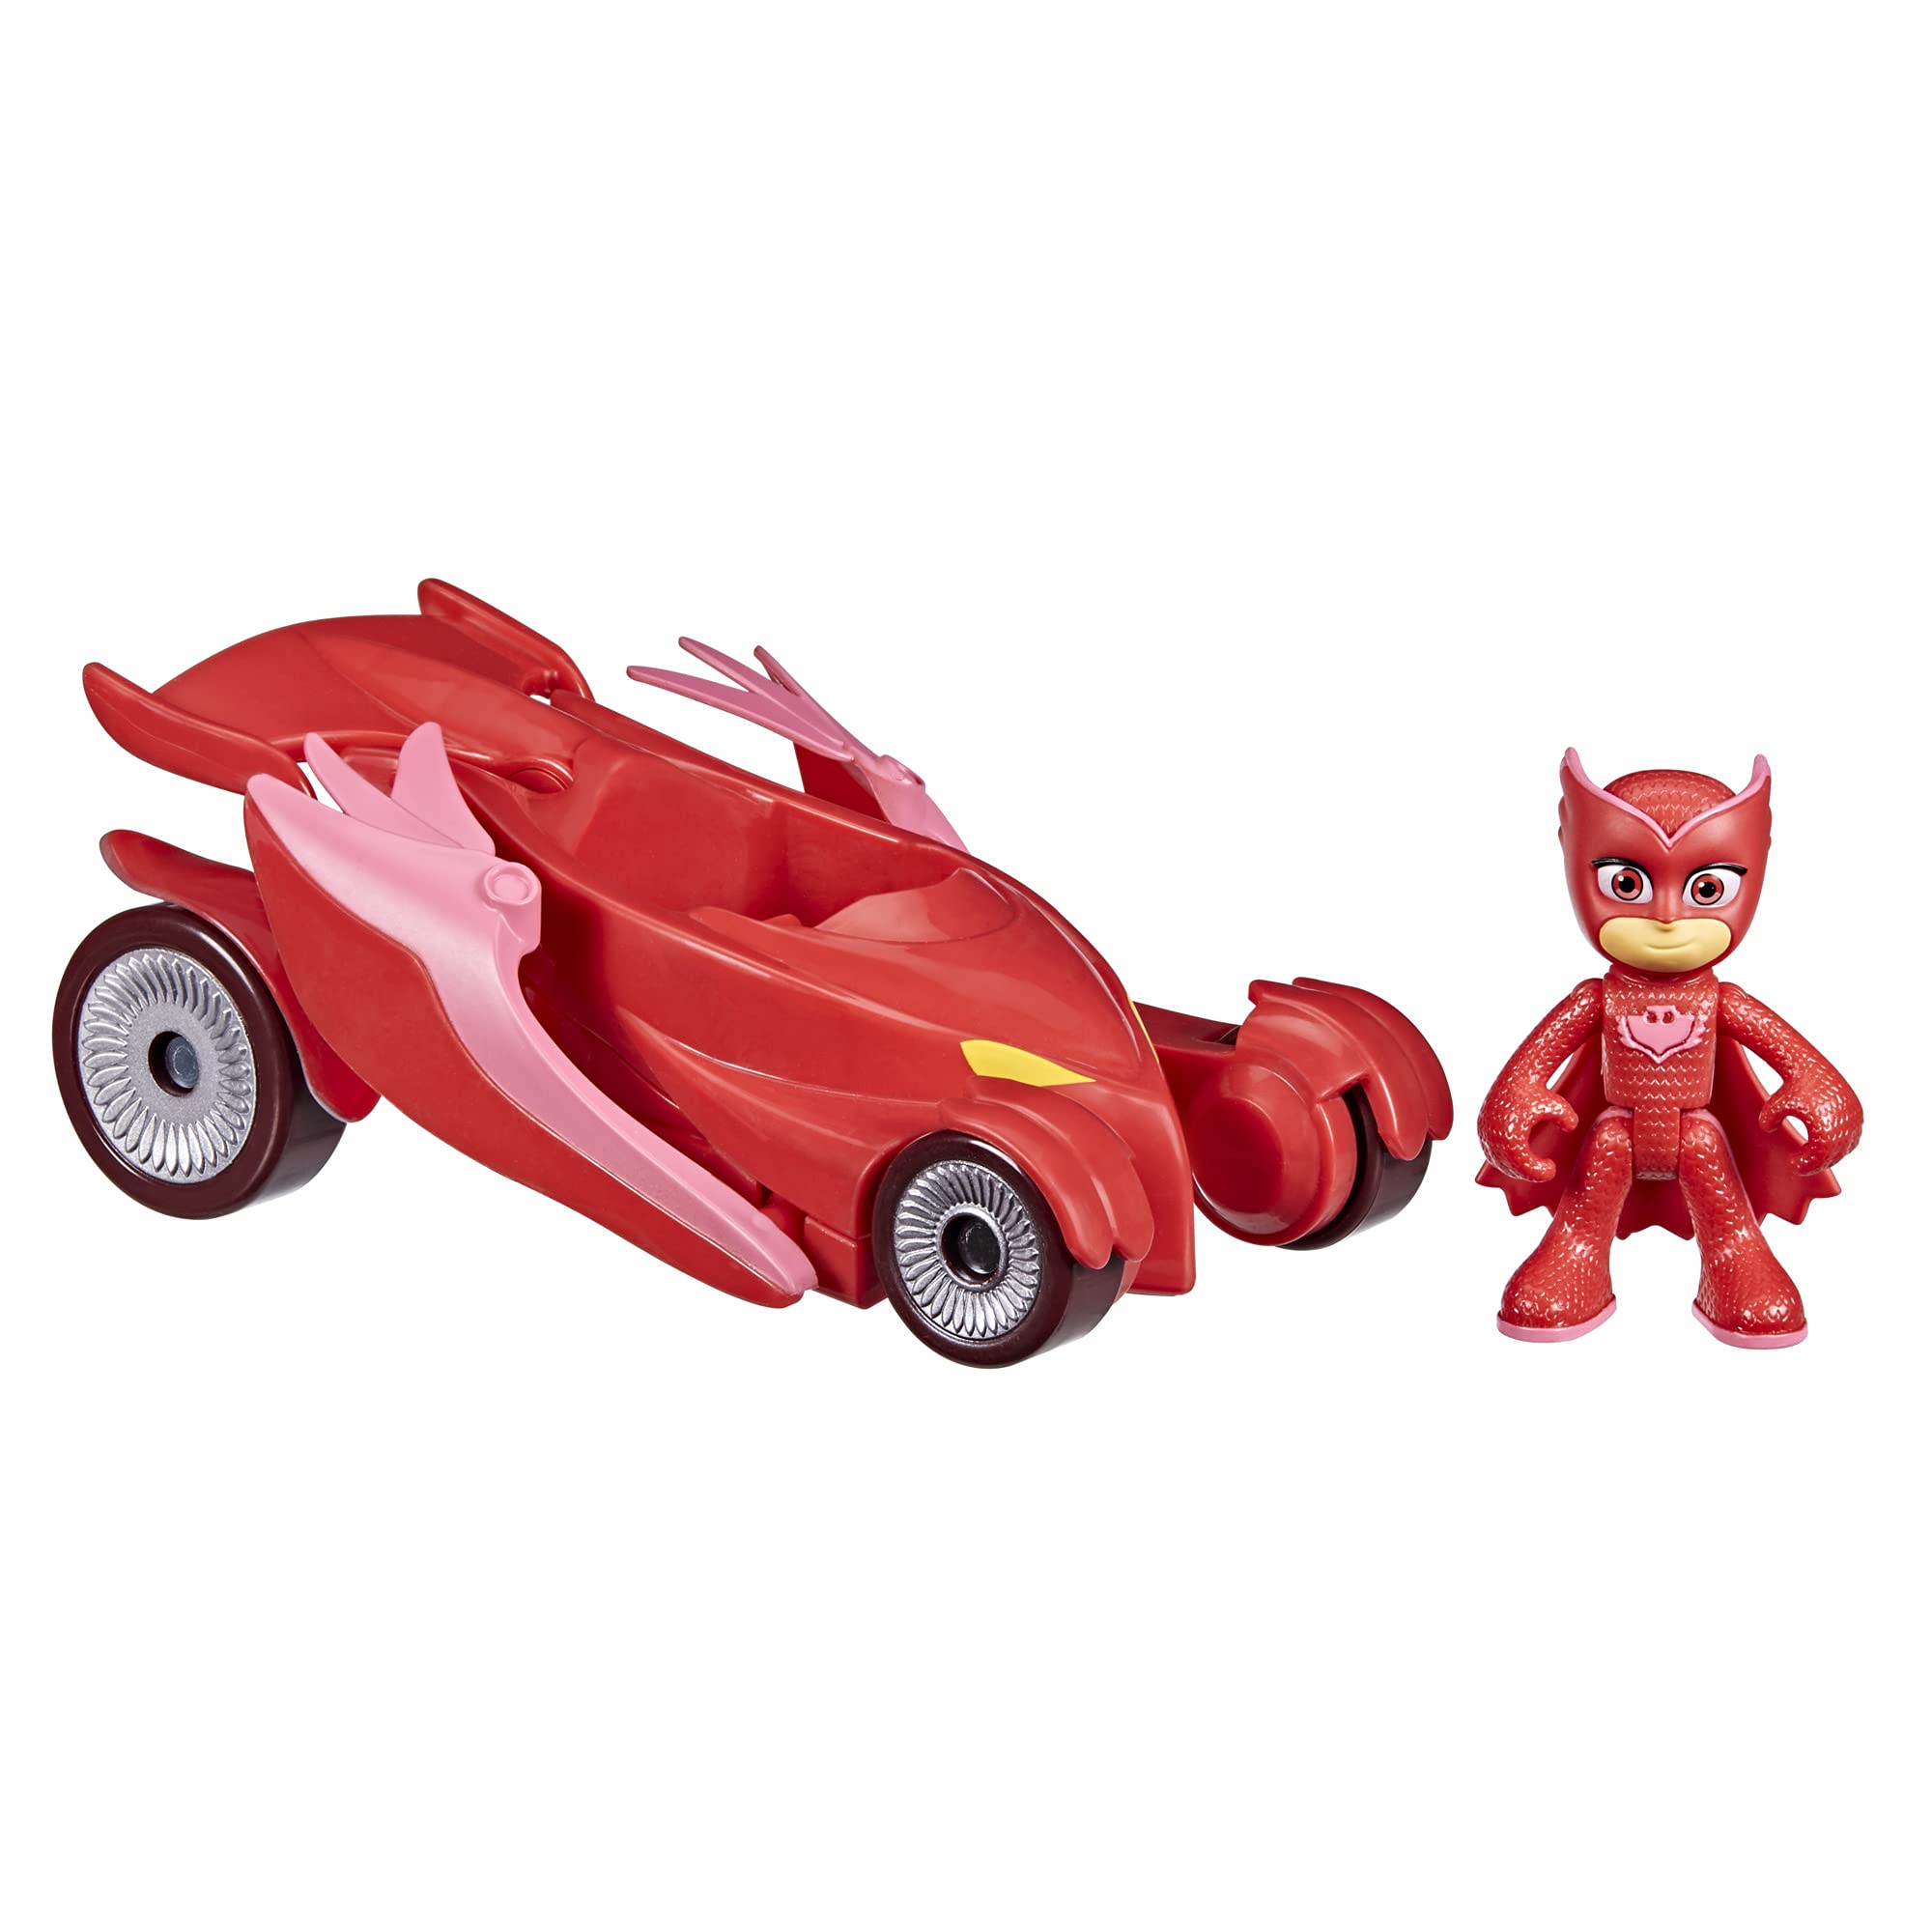 PJ Masks Owlette Deluxe Vehicle Preschool Toy, Owl Glider Car with Flapping Wings and Owlette Action Figure for Kids Ages 3 and Up